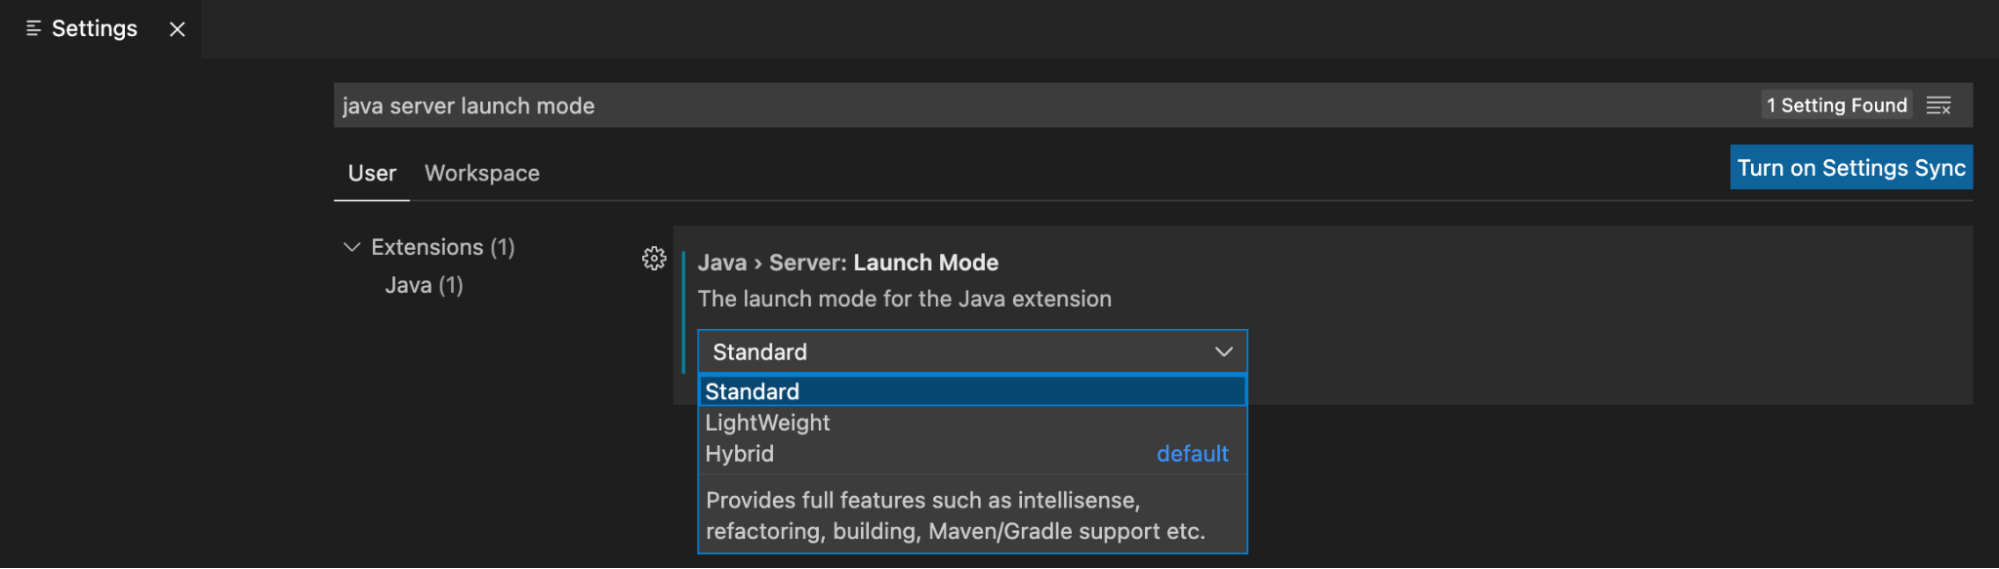 The VS Code settings open to the Extensions angle bracket Java section, highlighting the option Java angle bracket Server: Launch Mode with that option changed to Standard